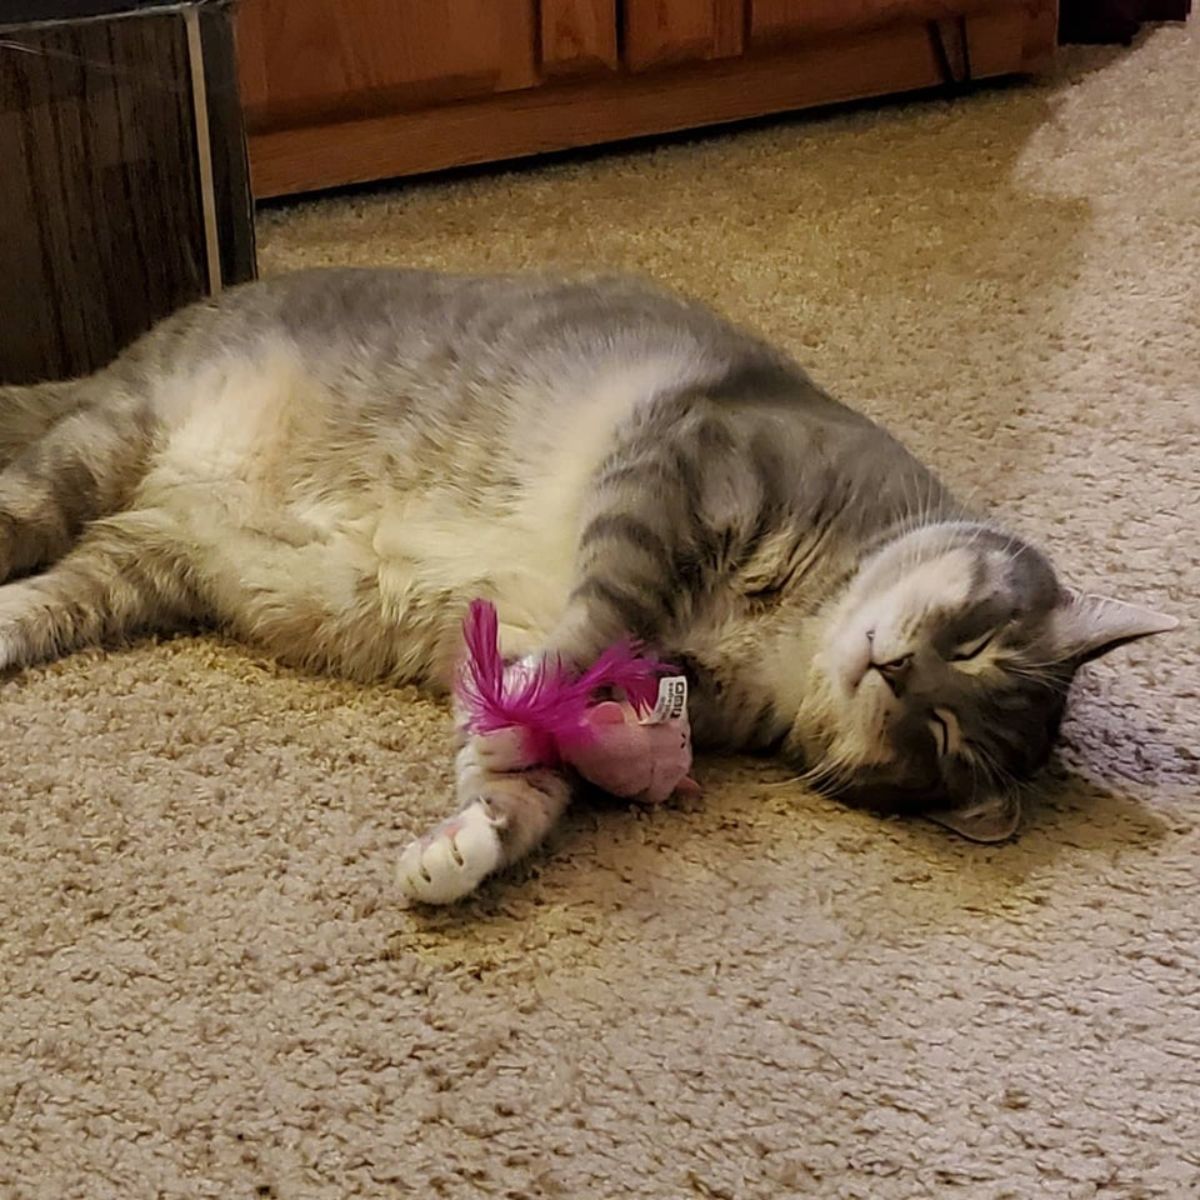 grey tabby cat sleeping on beige carpet holding a pink cat toy